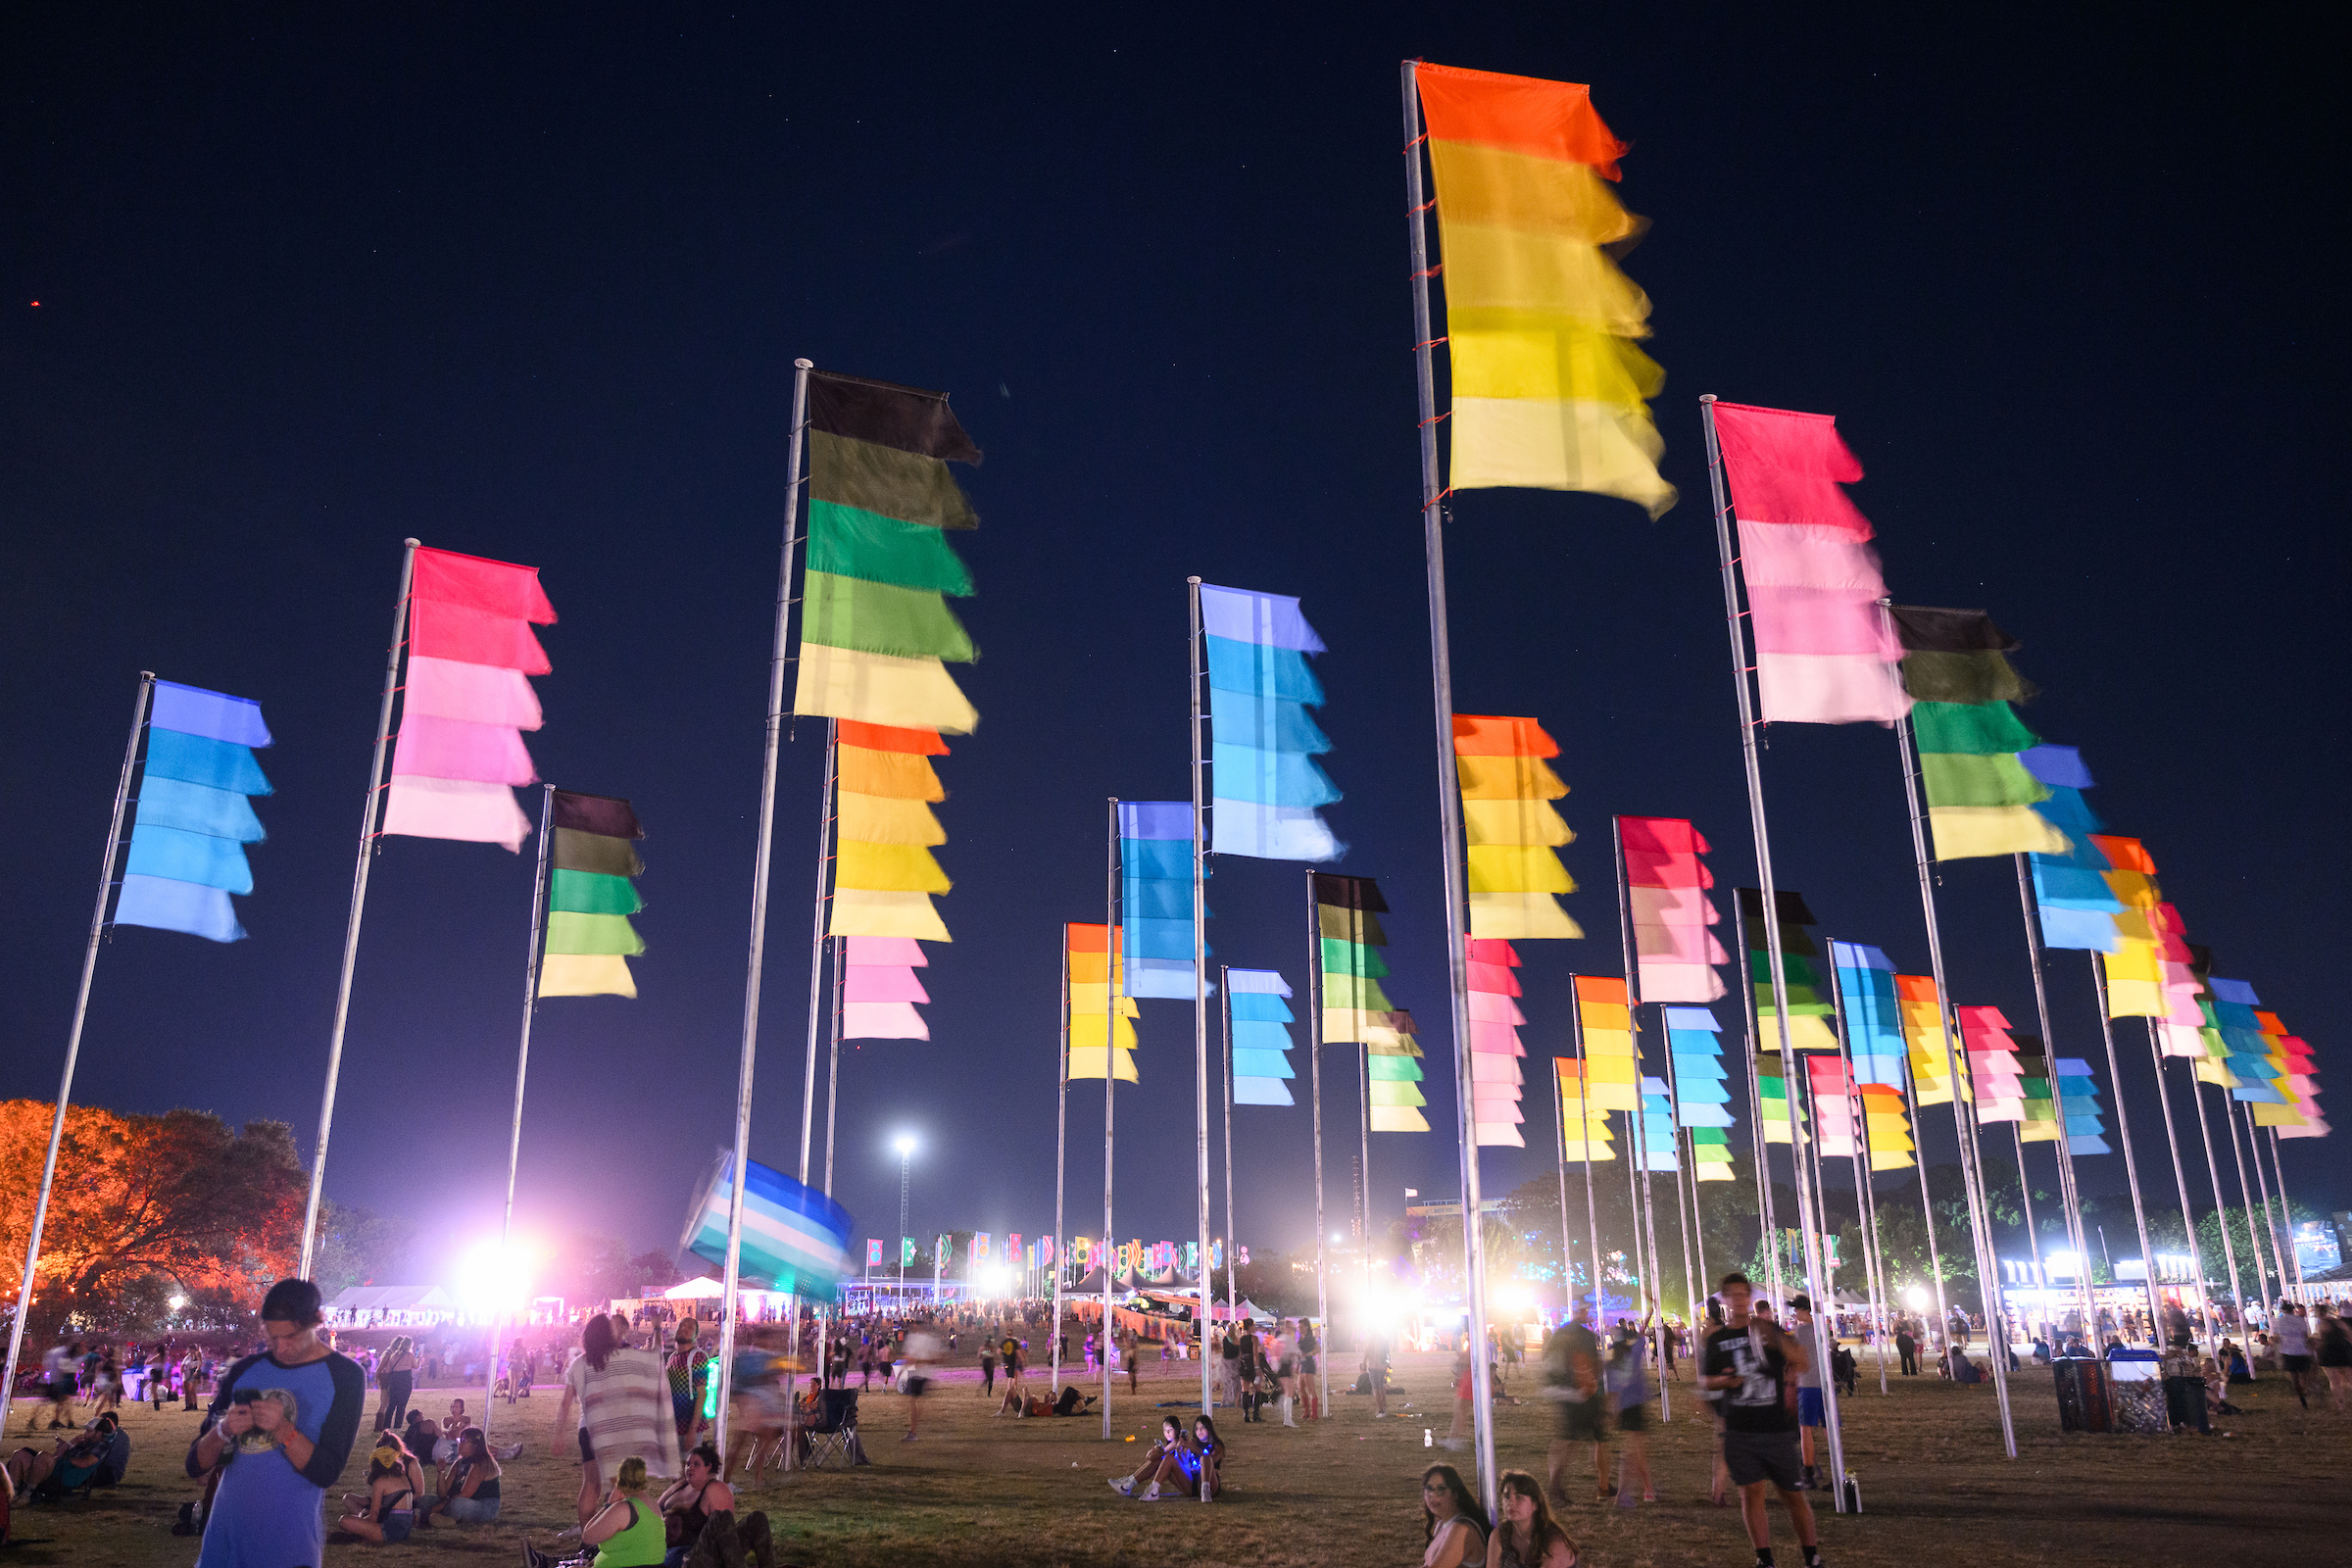 A festival grounds at night with tall colorful flags.